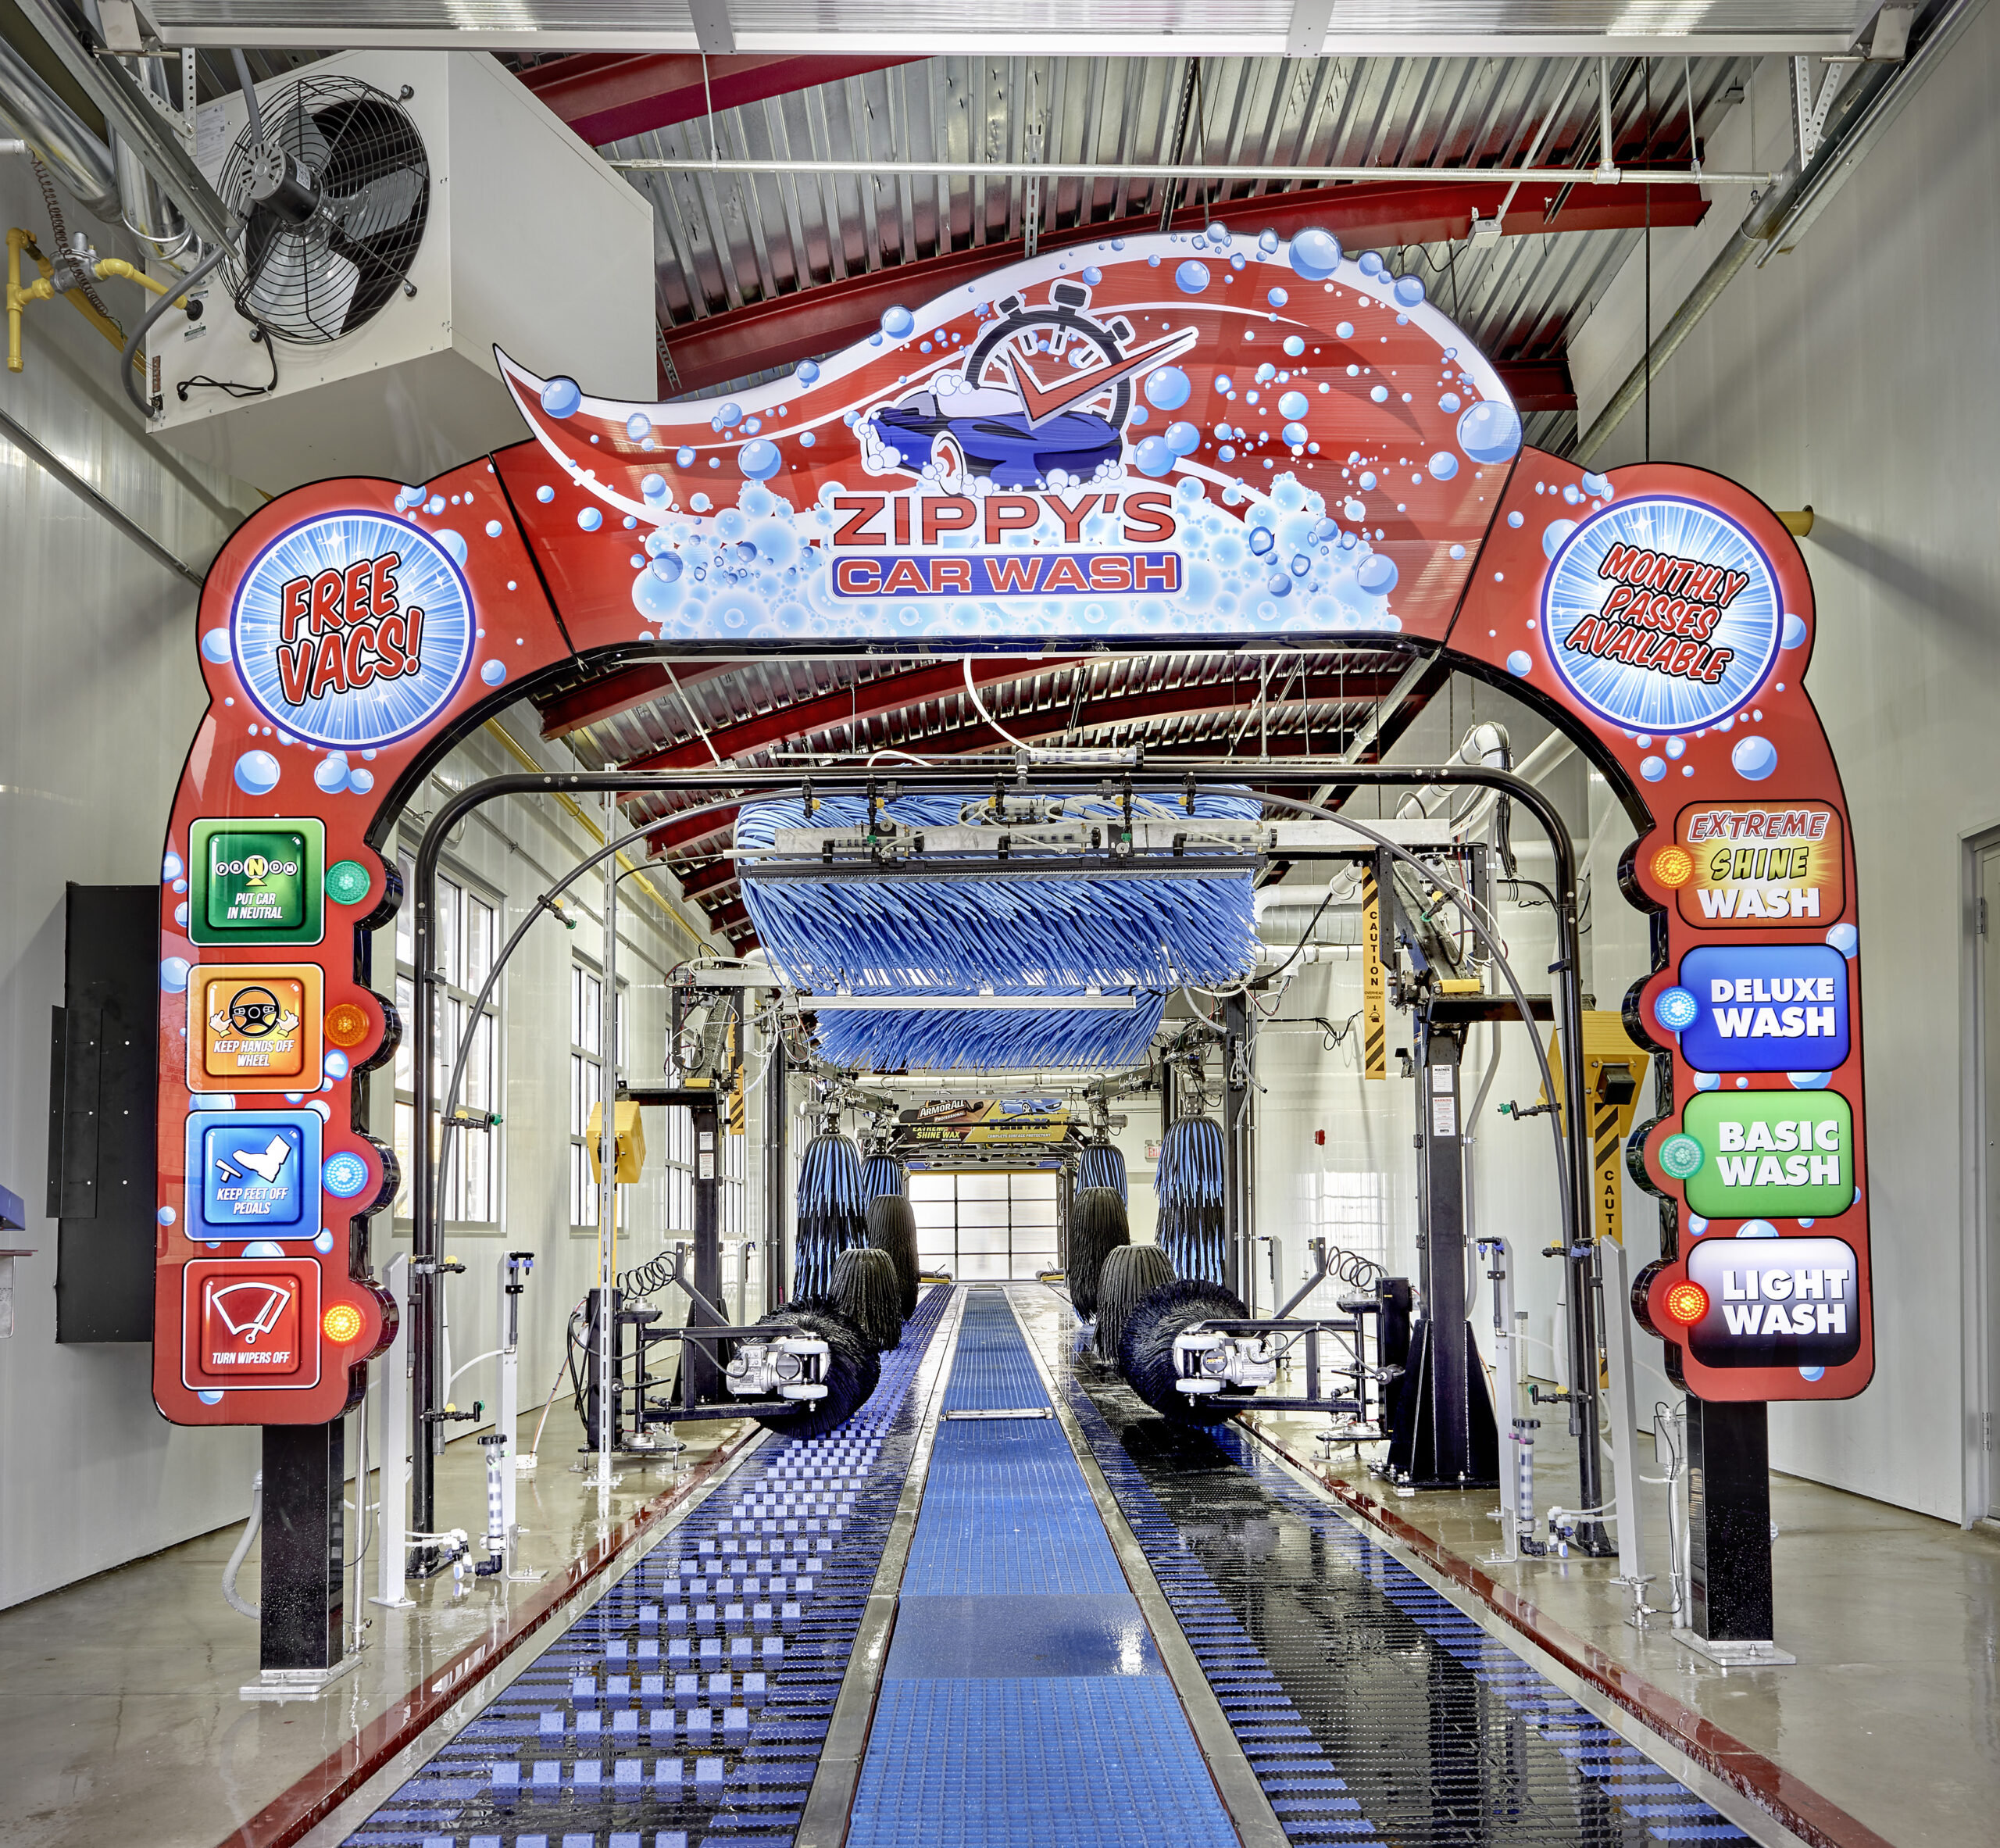 interior of Zippy's car wash with bright lights and moving brushes